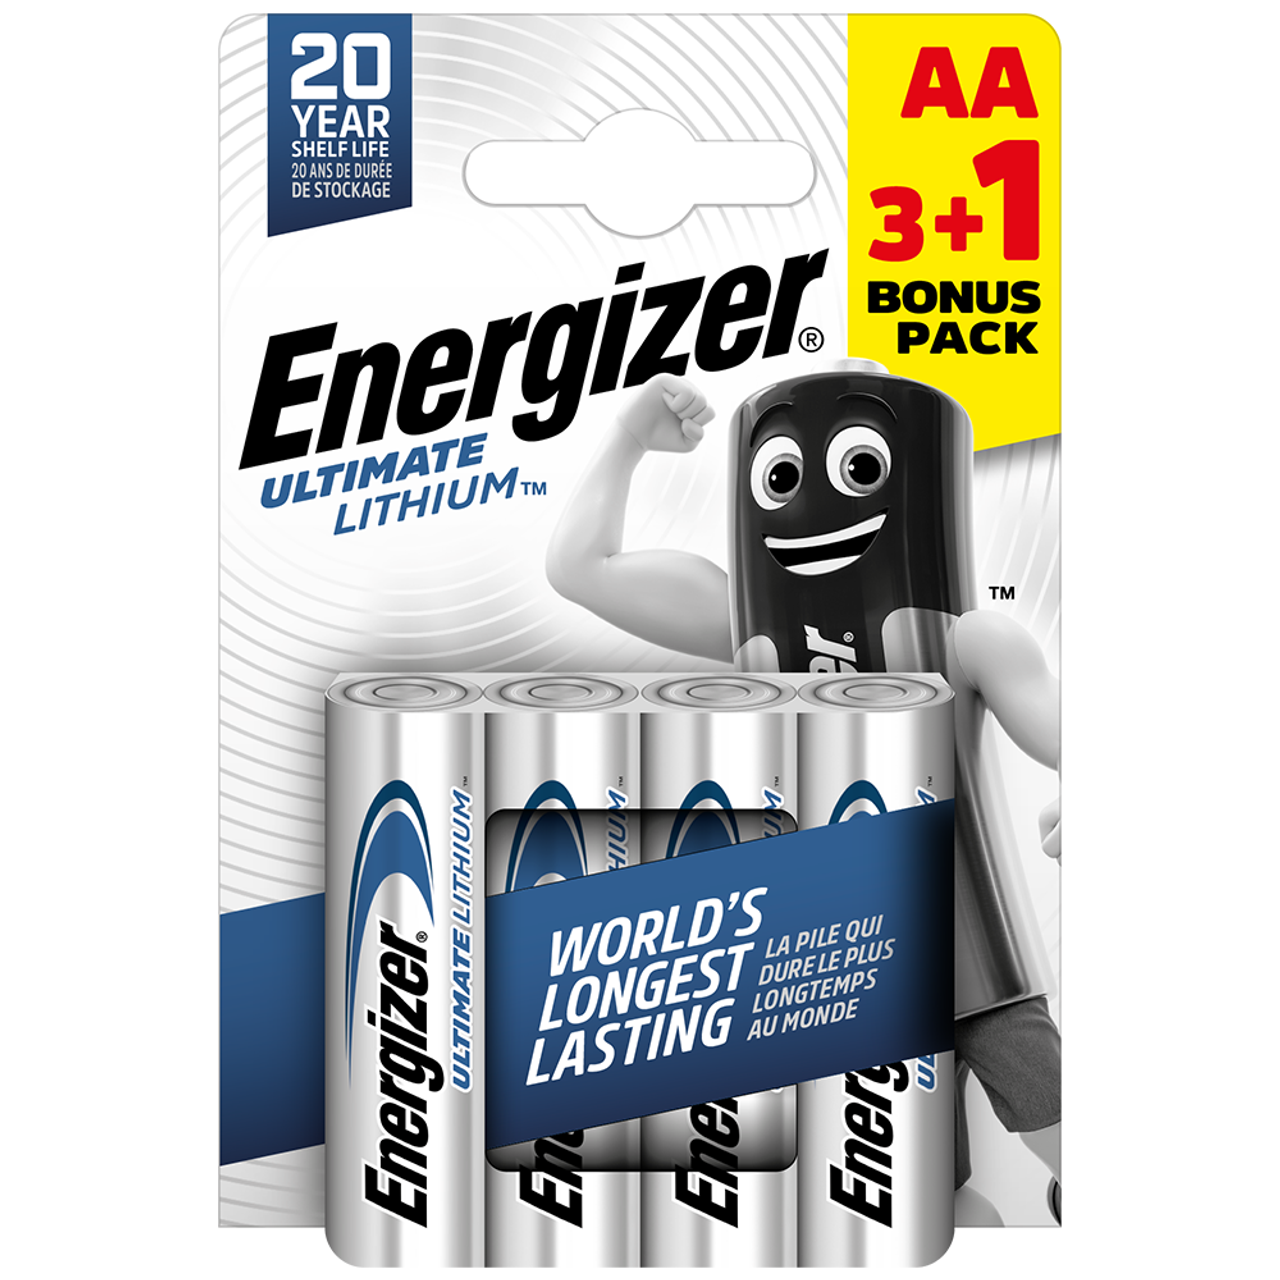 Energizer Ultimate Lithium AA review - Which?